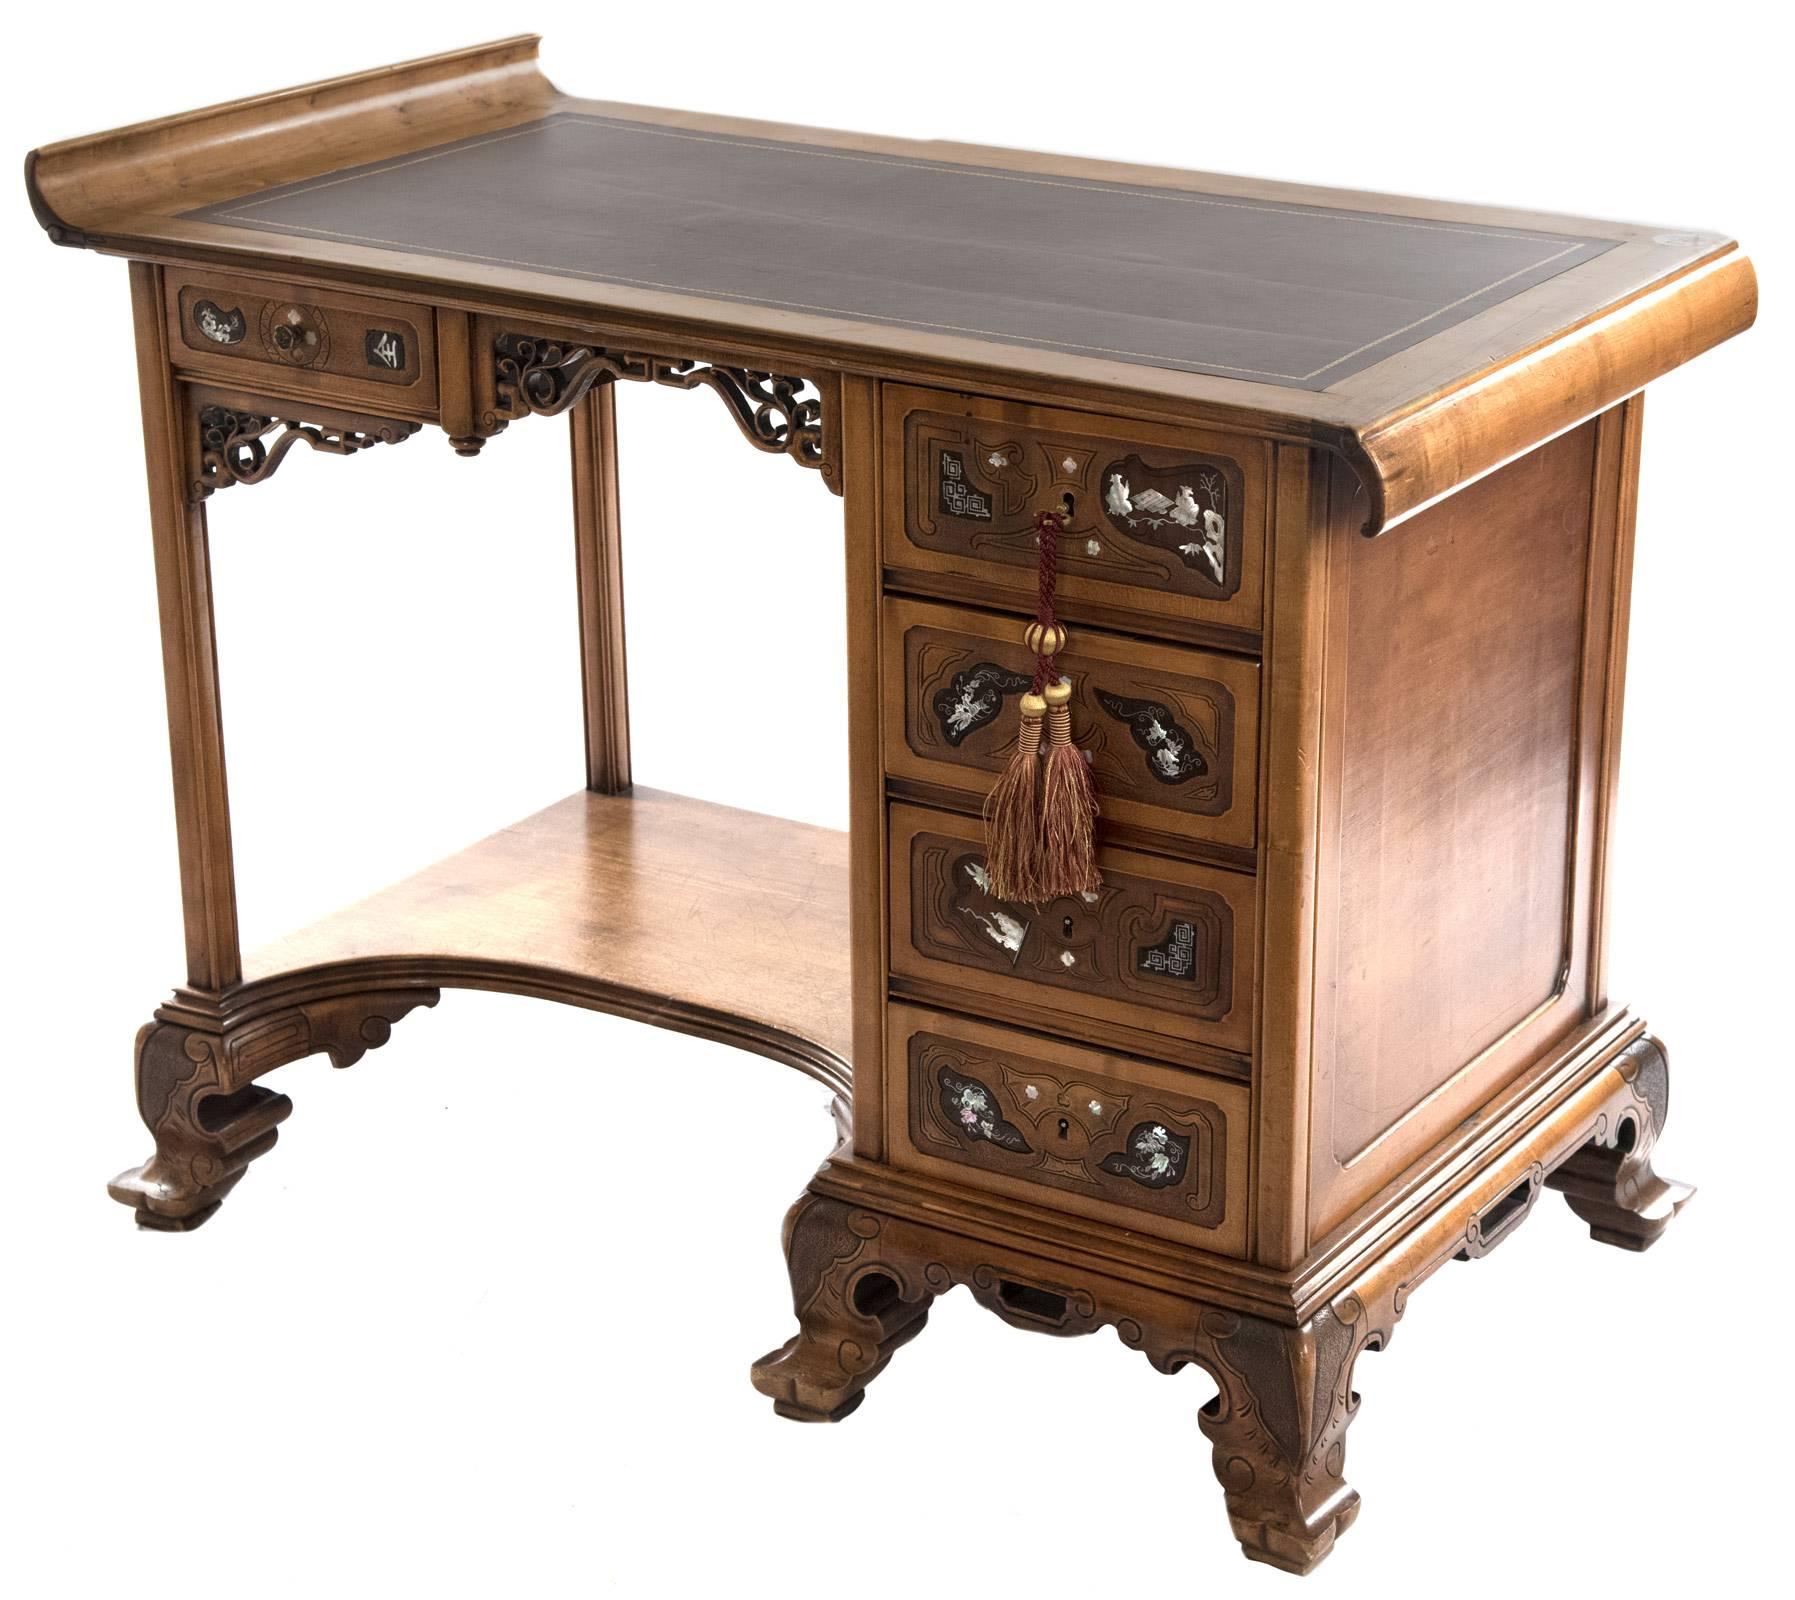 A carved walnut desk inspired by Asian forms for which Parisian cabinetmaker Gabriel Viardot (1830-1906) was renowned in the late 19th century. The desktop has up-curved and down-curved ends and is fitted with a leather pad, above an apron with a